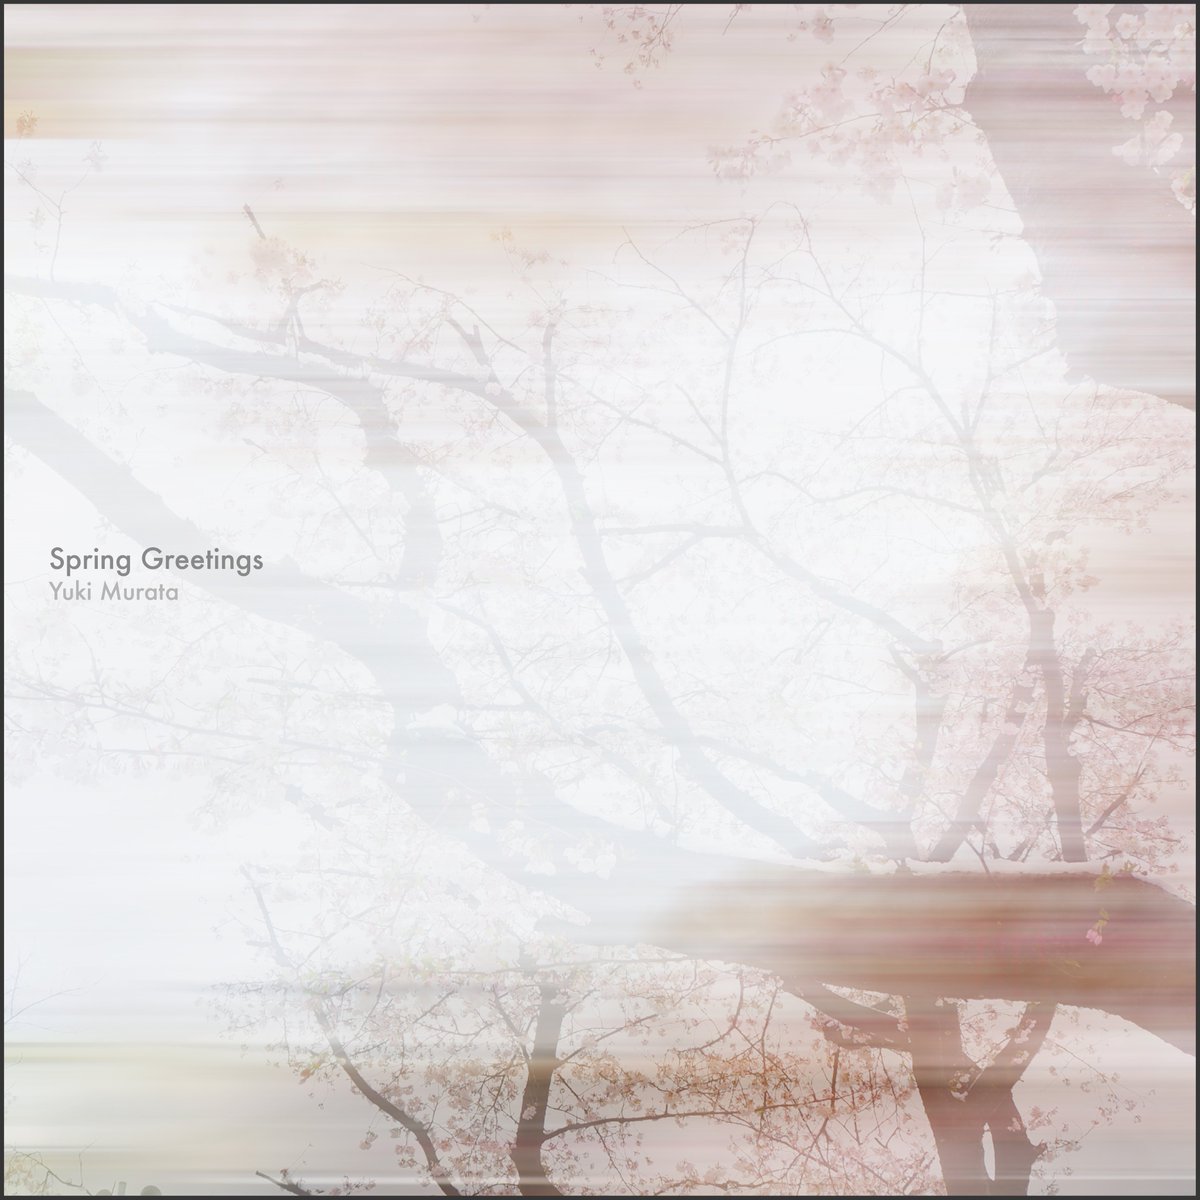 Anoice Archive: The release anniversary of a member of Anoice, Yuki Murata's 2nd EP 'Spring Greetings'. One spring day, several months after the coronavirus began to spread, she recorded alone. Spotify, Apple Music, etc: linkco.re/zVgXT9rN BandCamp: bit.ly/3aQvqSw